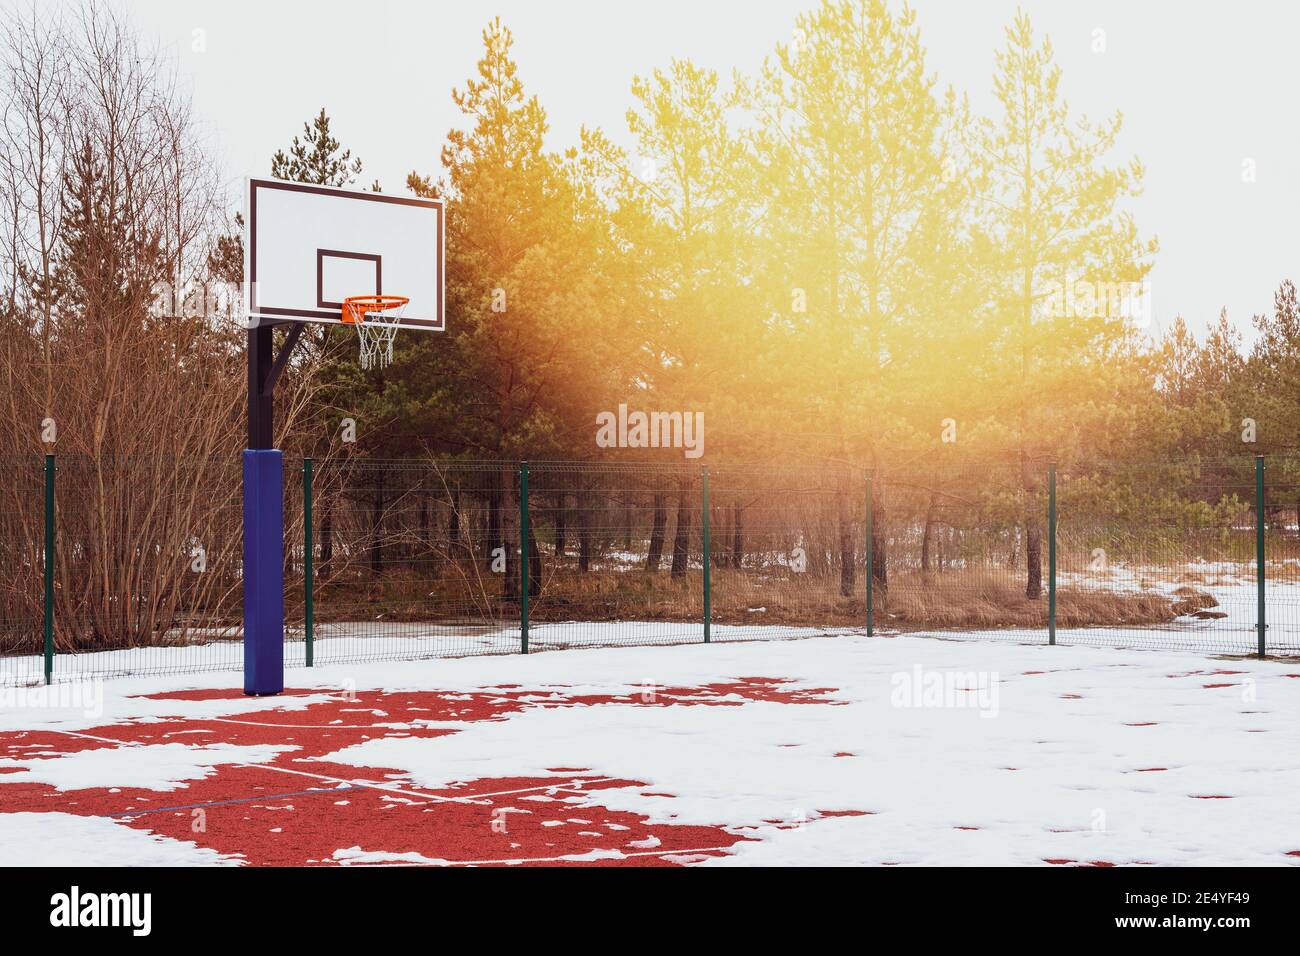 Basketball court found in the outdoors during winter season Stock Photo -  Alamy